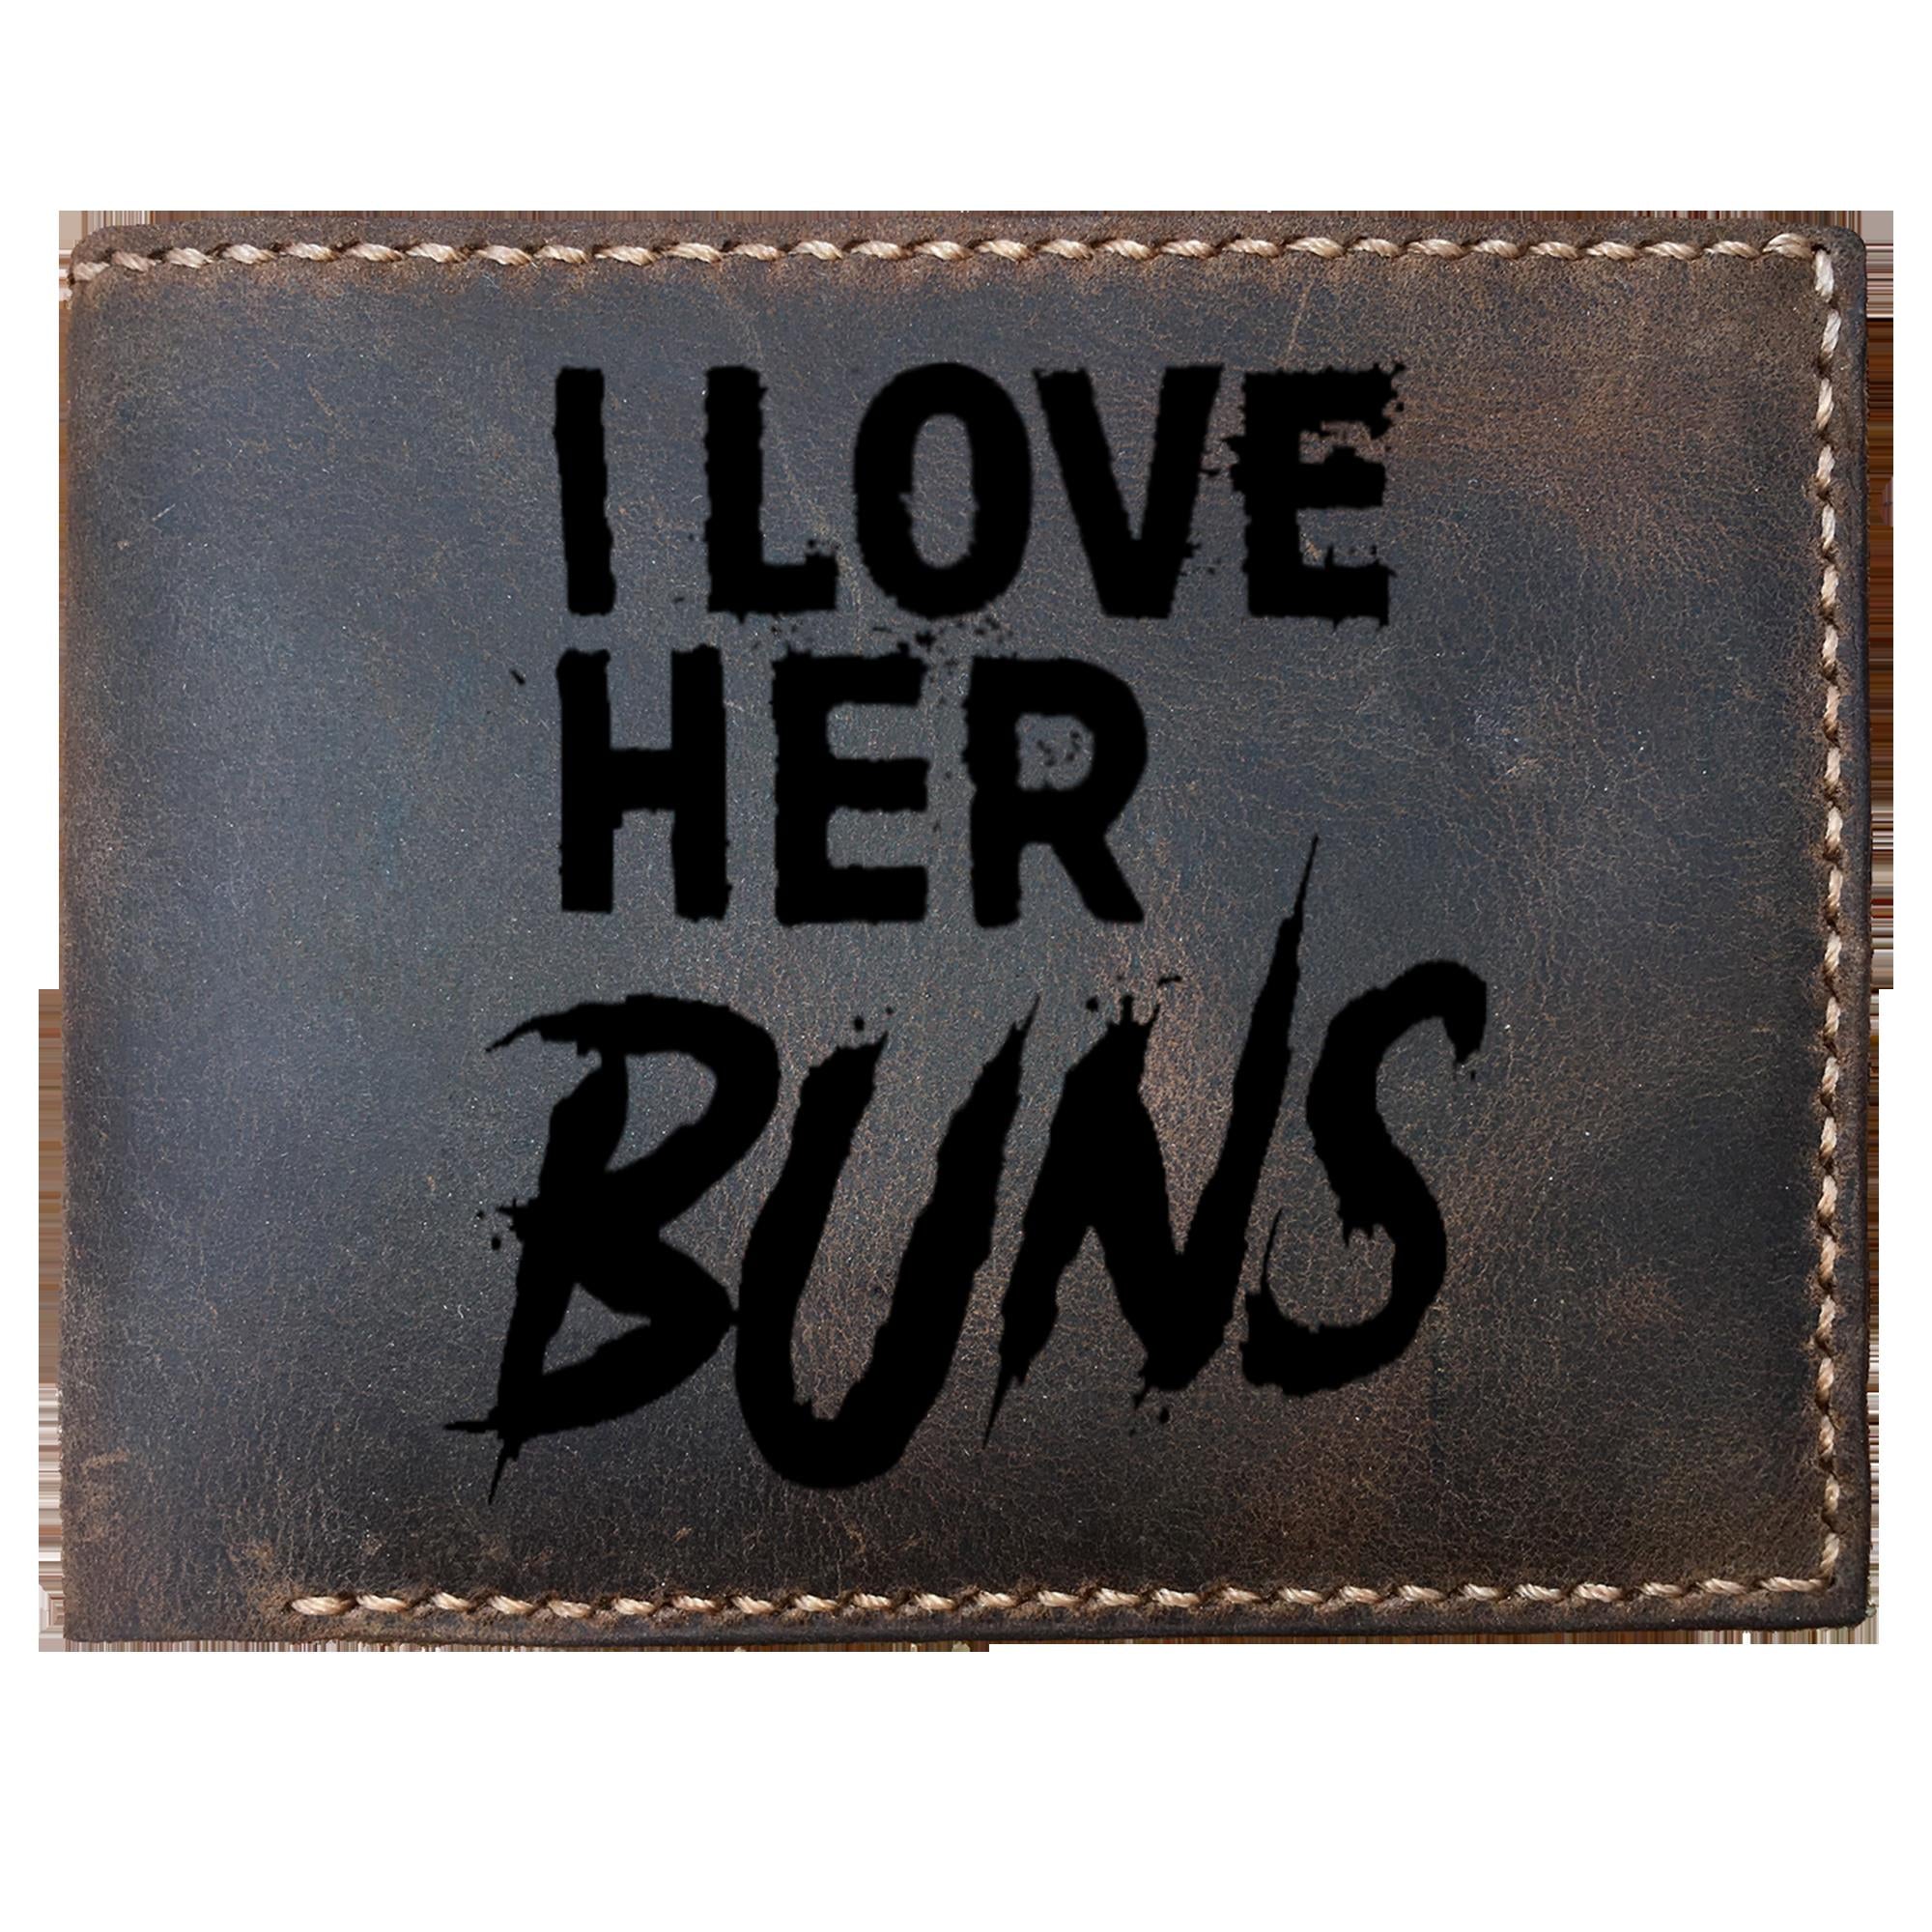 Skitongifts Funny Custom Laser Engraved Bifold Leather Wallet For Men, Couples Her Buns His Guns